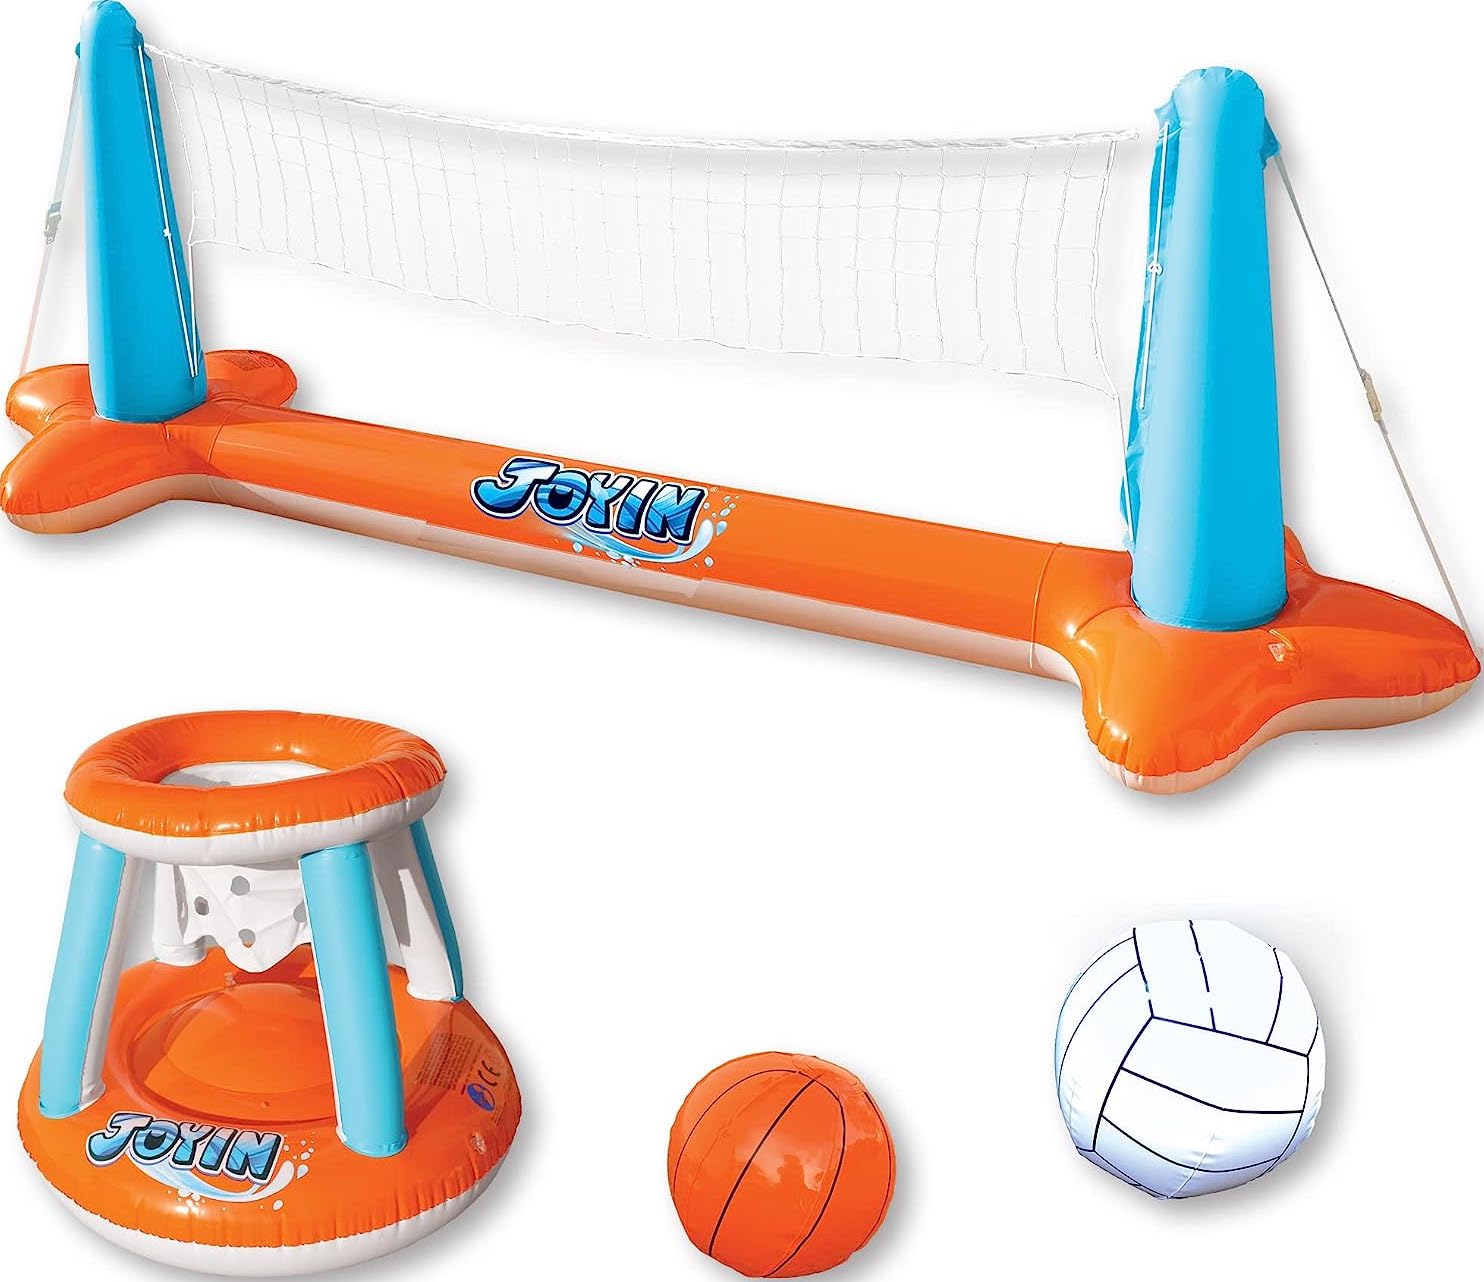 Inflatable volleyball net, basketball net, and ball 